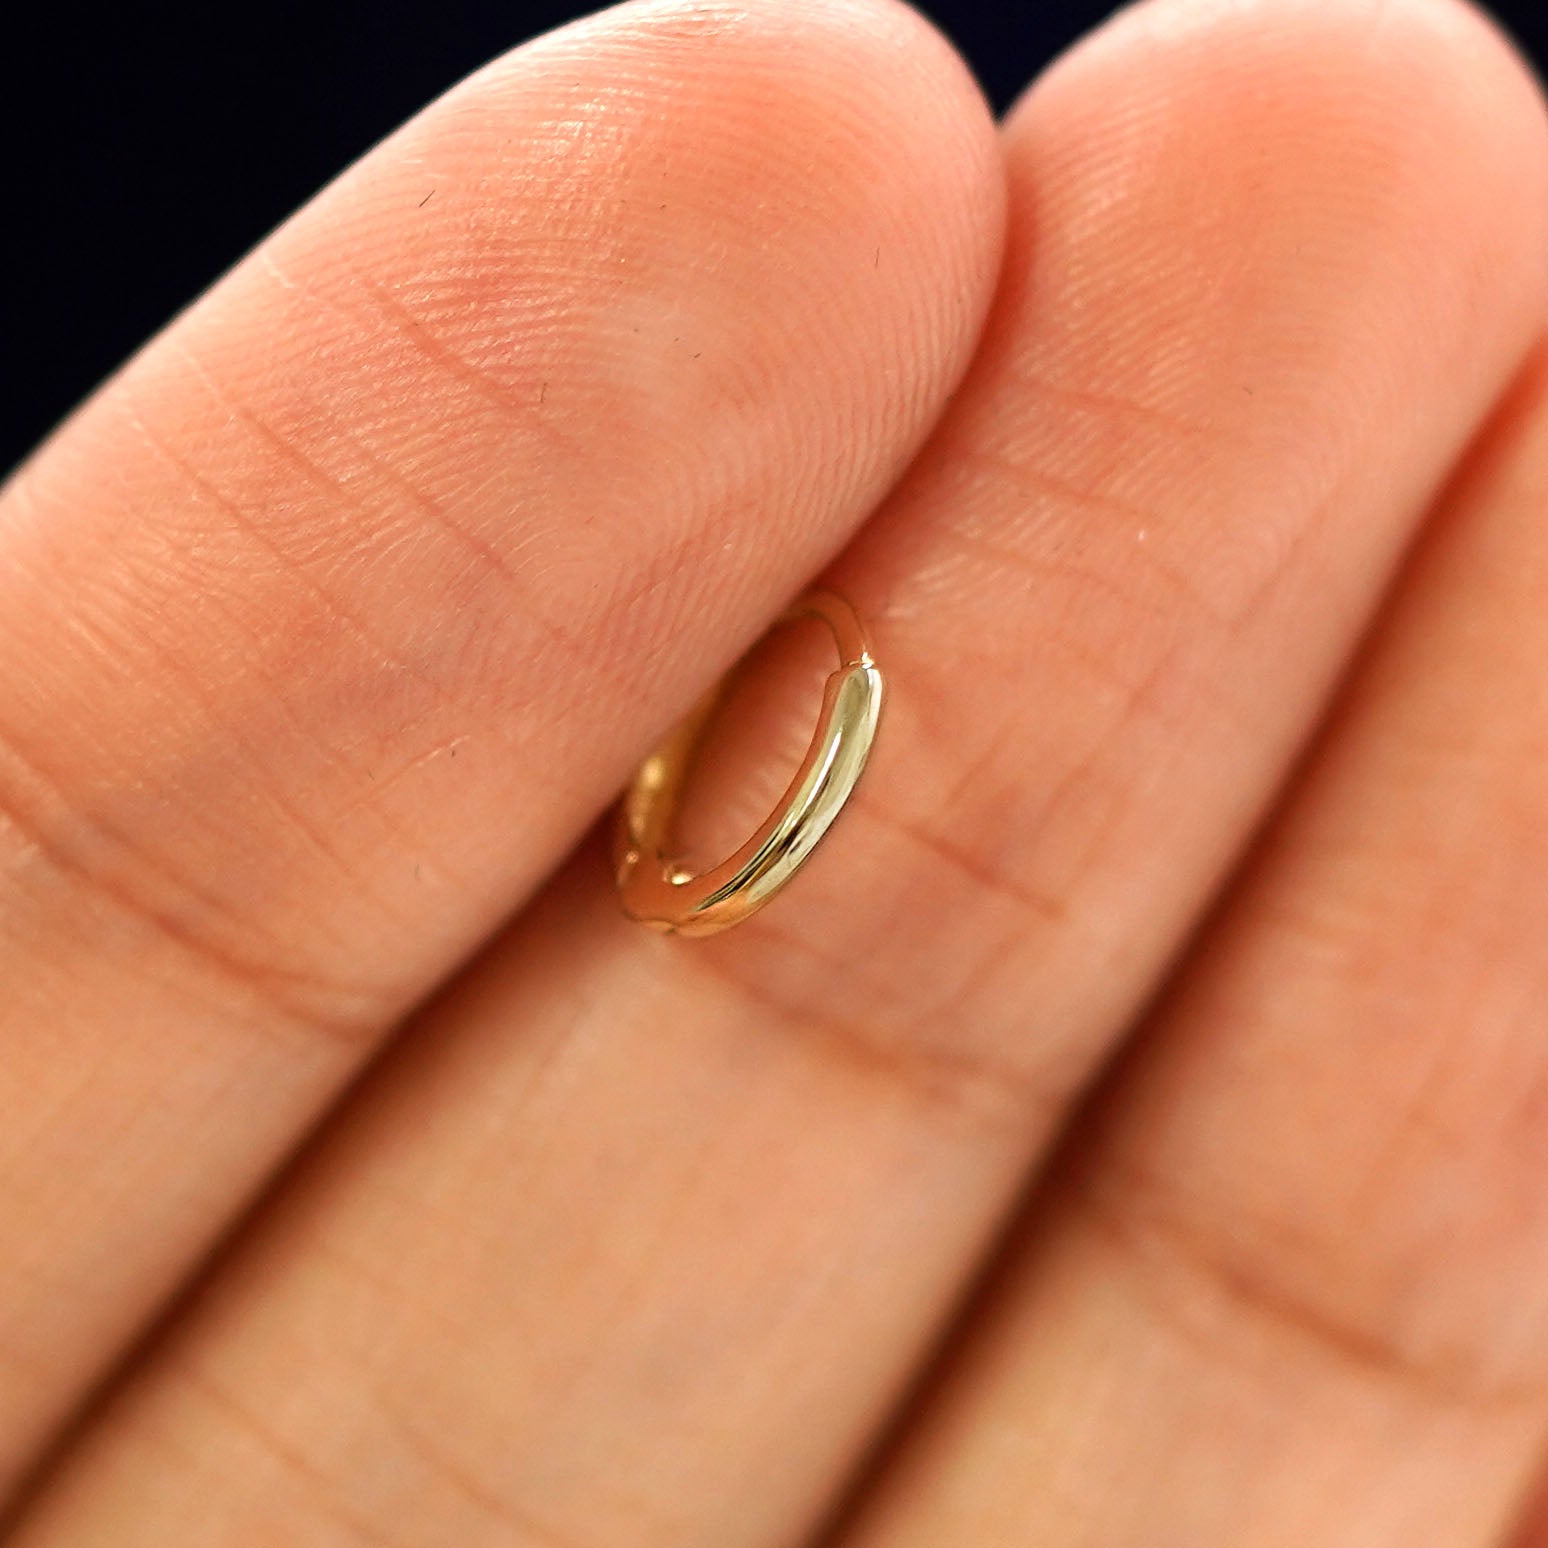 A 14k gold Mini Curvy Huggie Hoop Earring held in between a model's fingers to show the hoops thickness